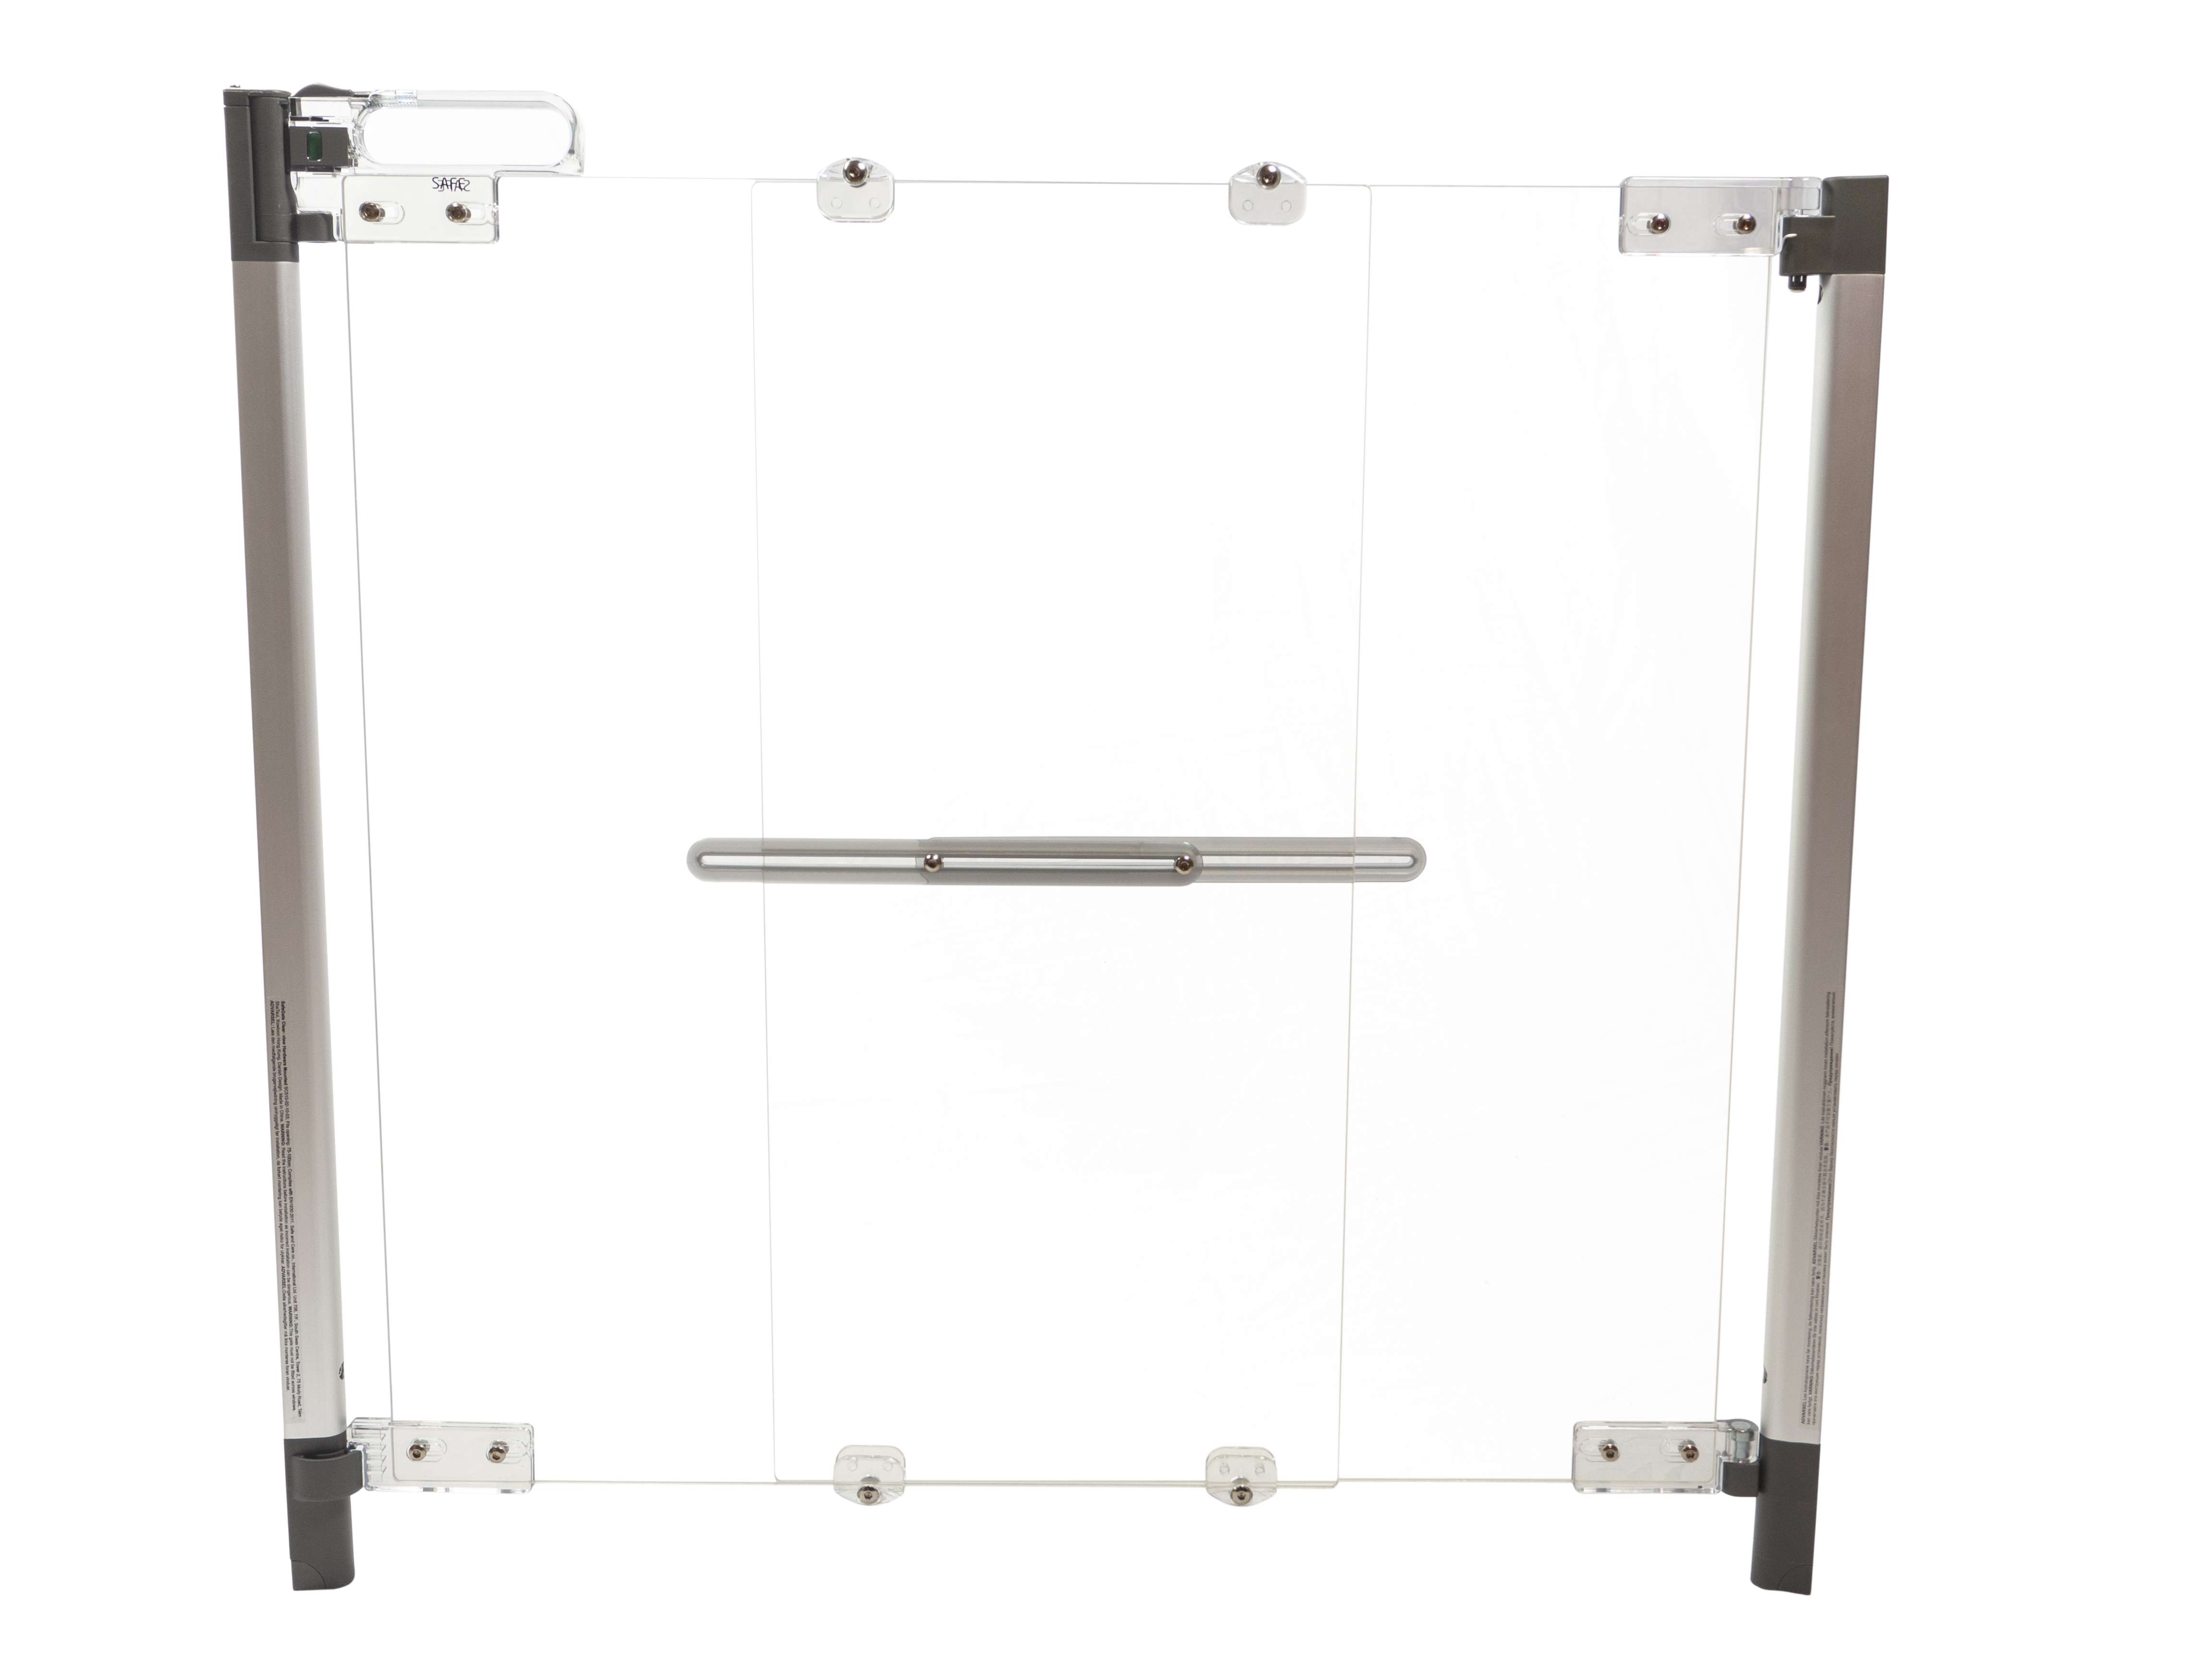 SAFE - SafeGate Clear-View Hardware Mounted Gate (75-100 cm)